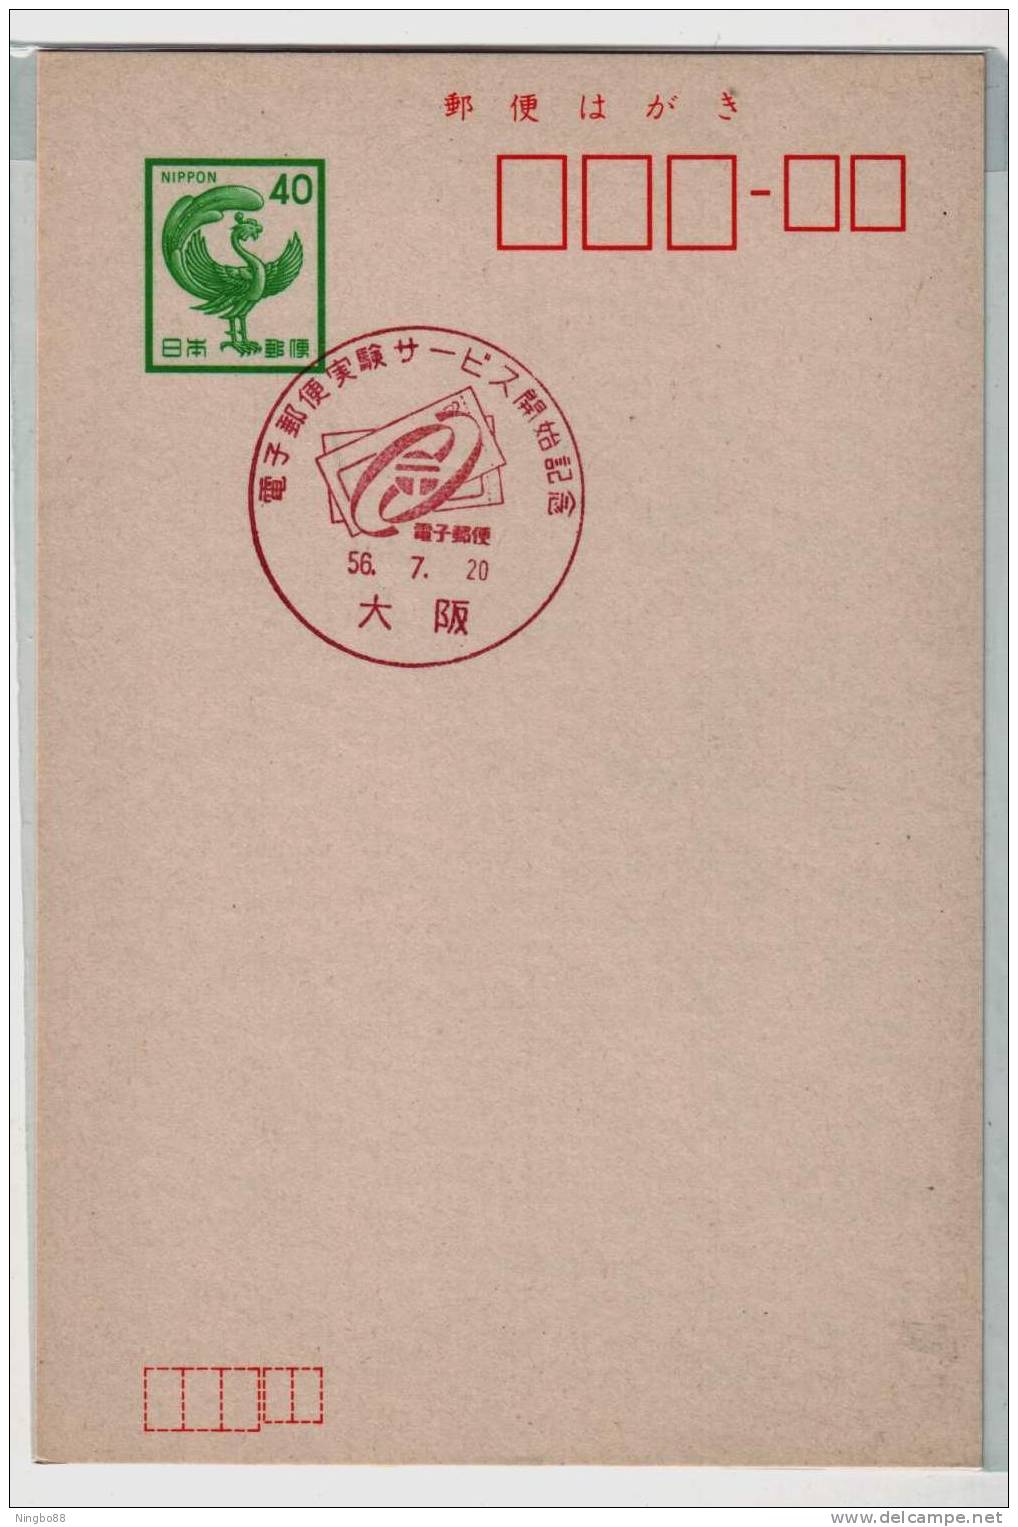 Japan 1981 The Opening Of Electronic Mail Test Center In Osaka Commemorative Pictorial Postmark Used On Card - Timbres De Distributeurs [ATM]